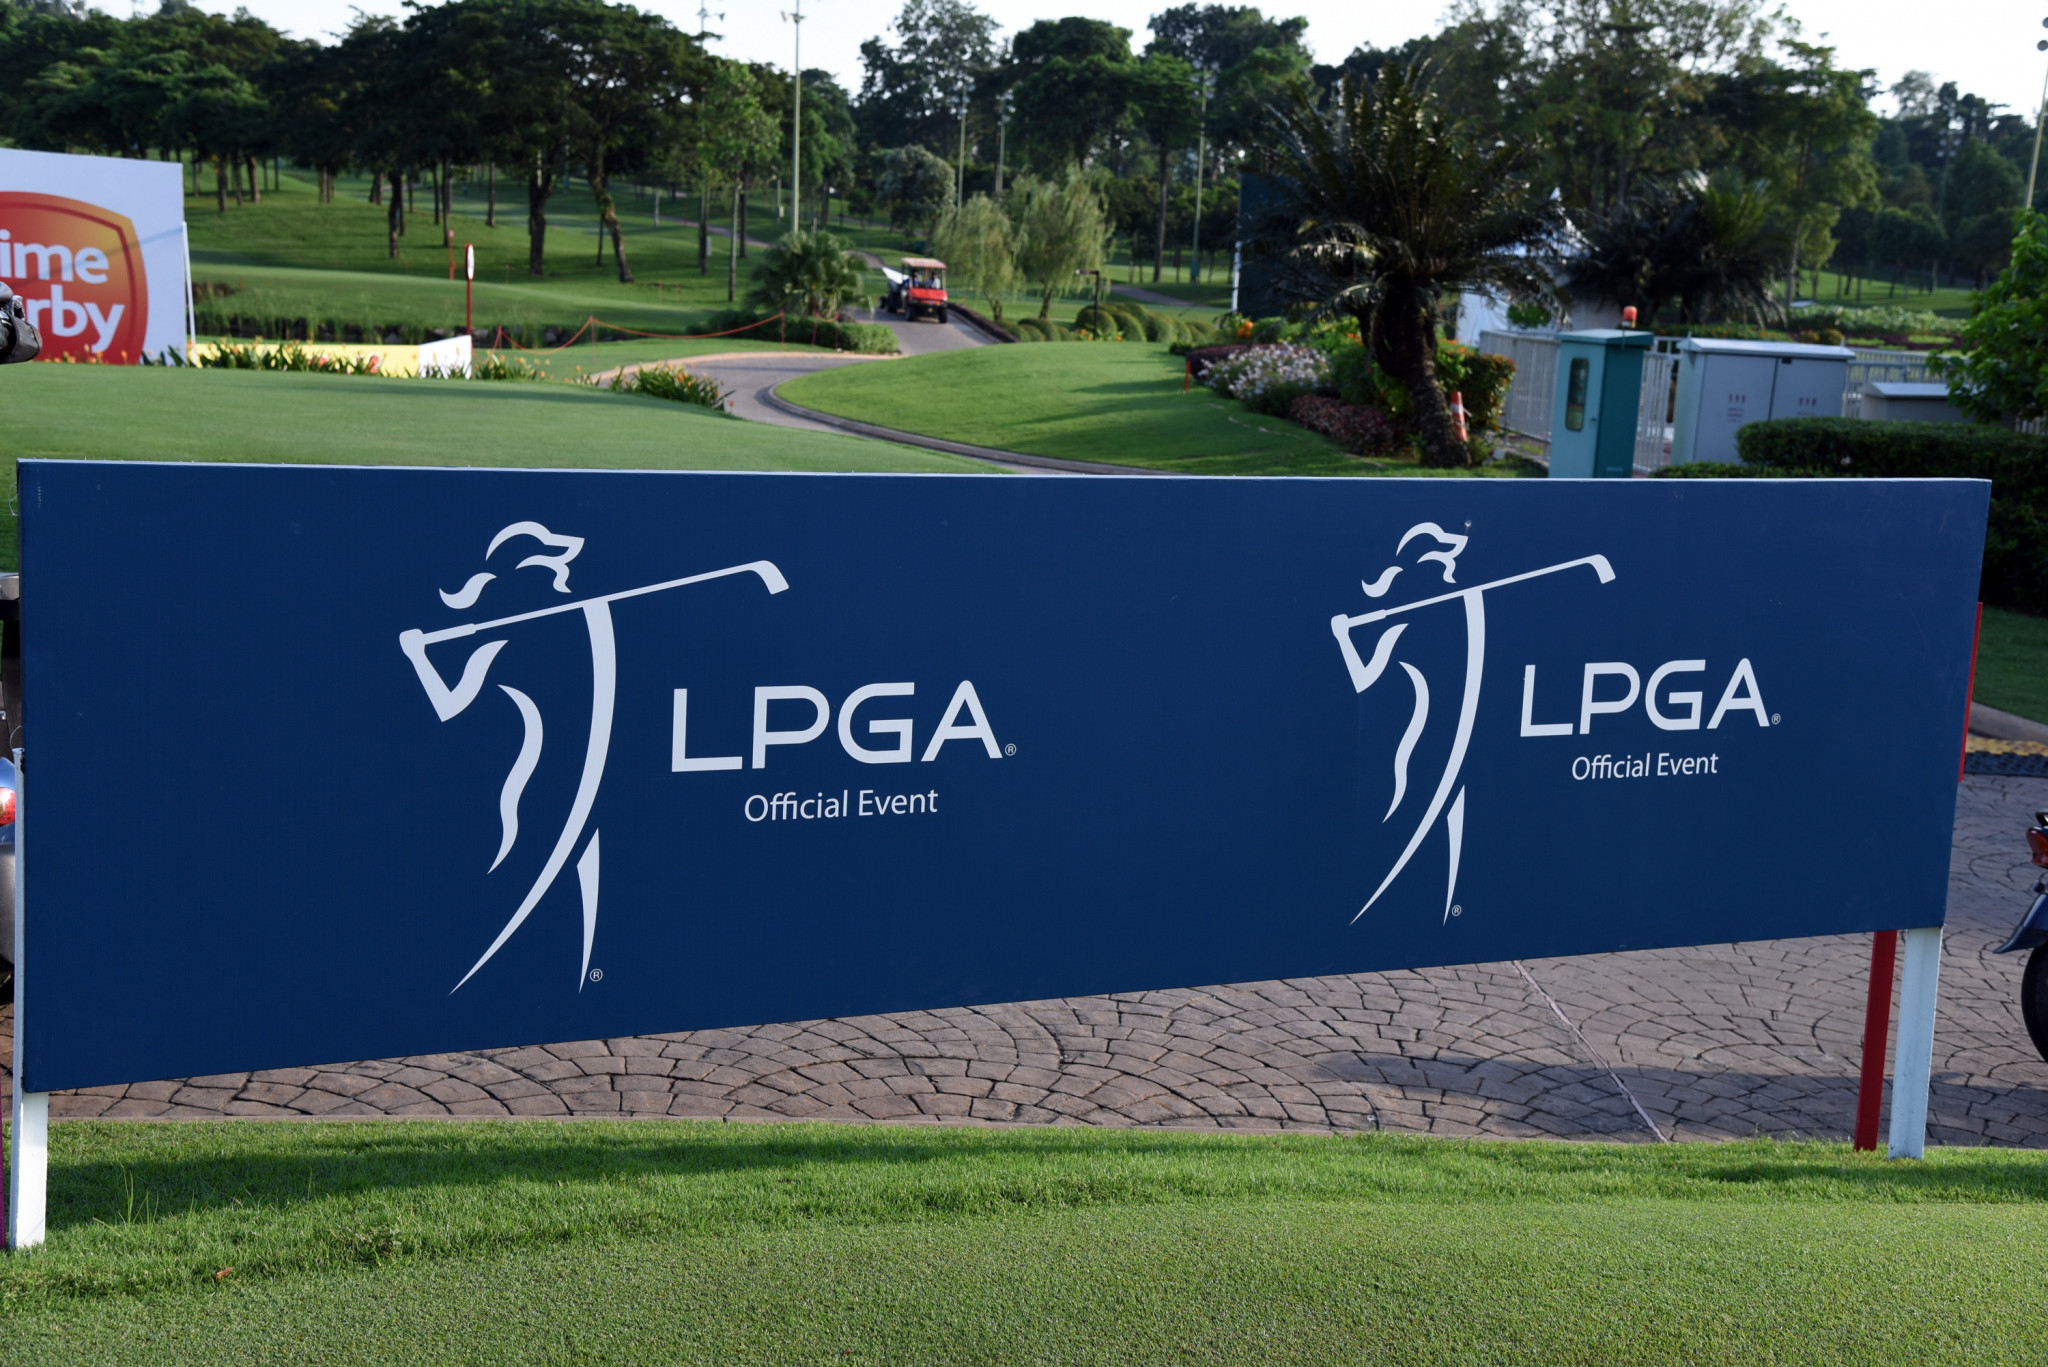 Eurofins has been named the official testing partner of the LPGA Tour ©Getty Images